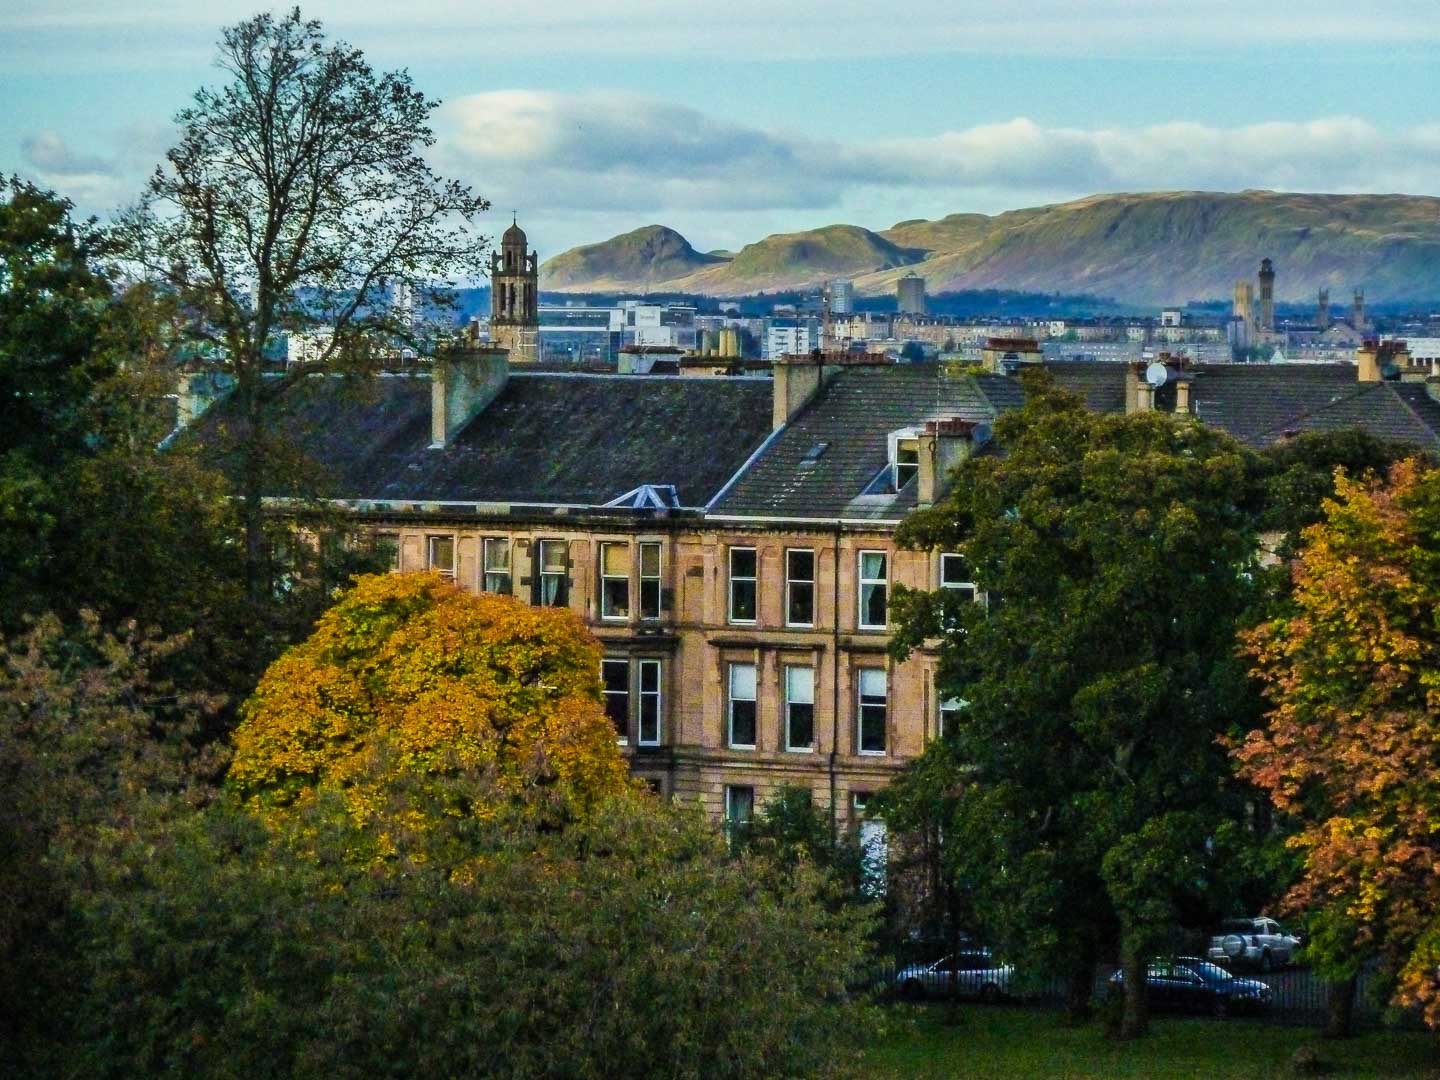 FROM QUEENS PARK
looking north, across the west of the city, to the Campsie Fells beyond